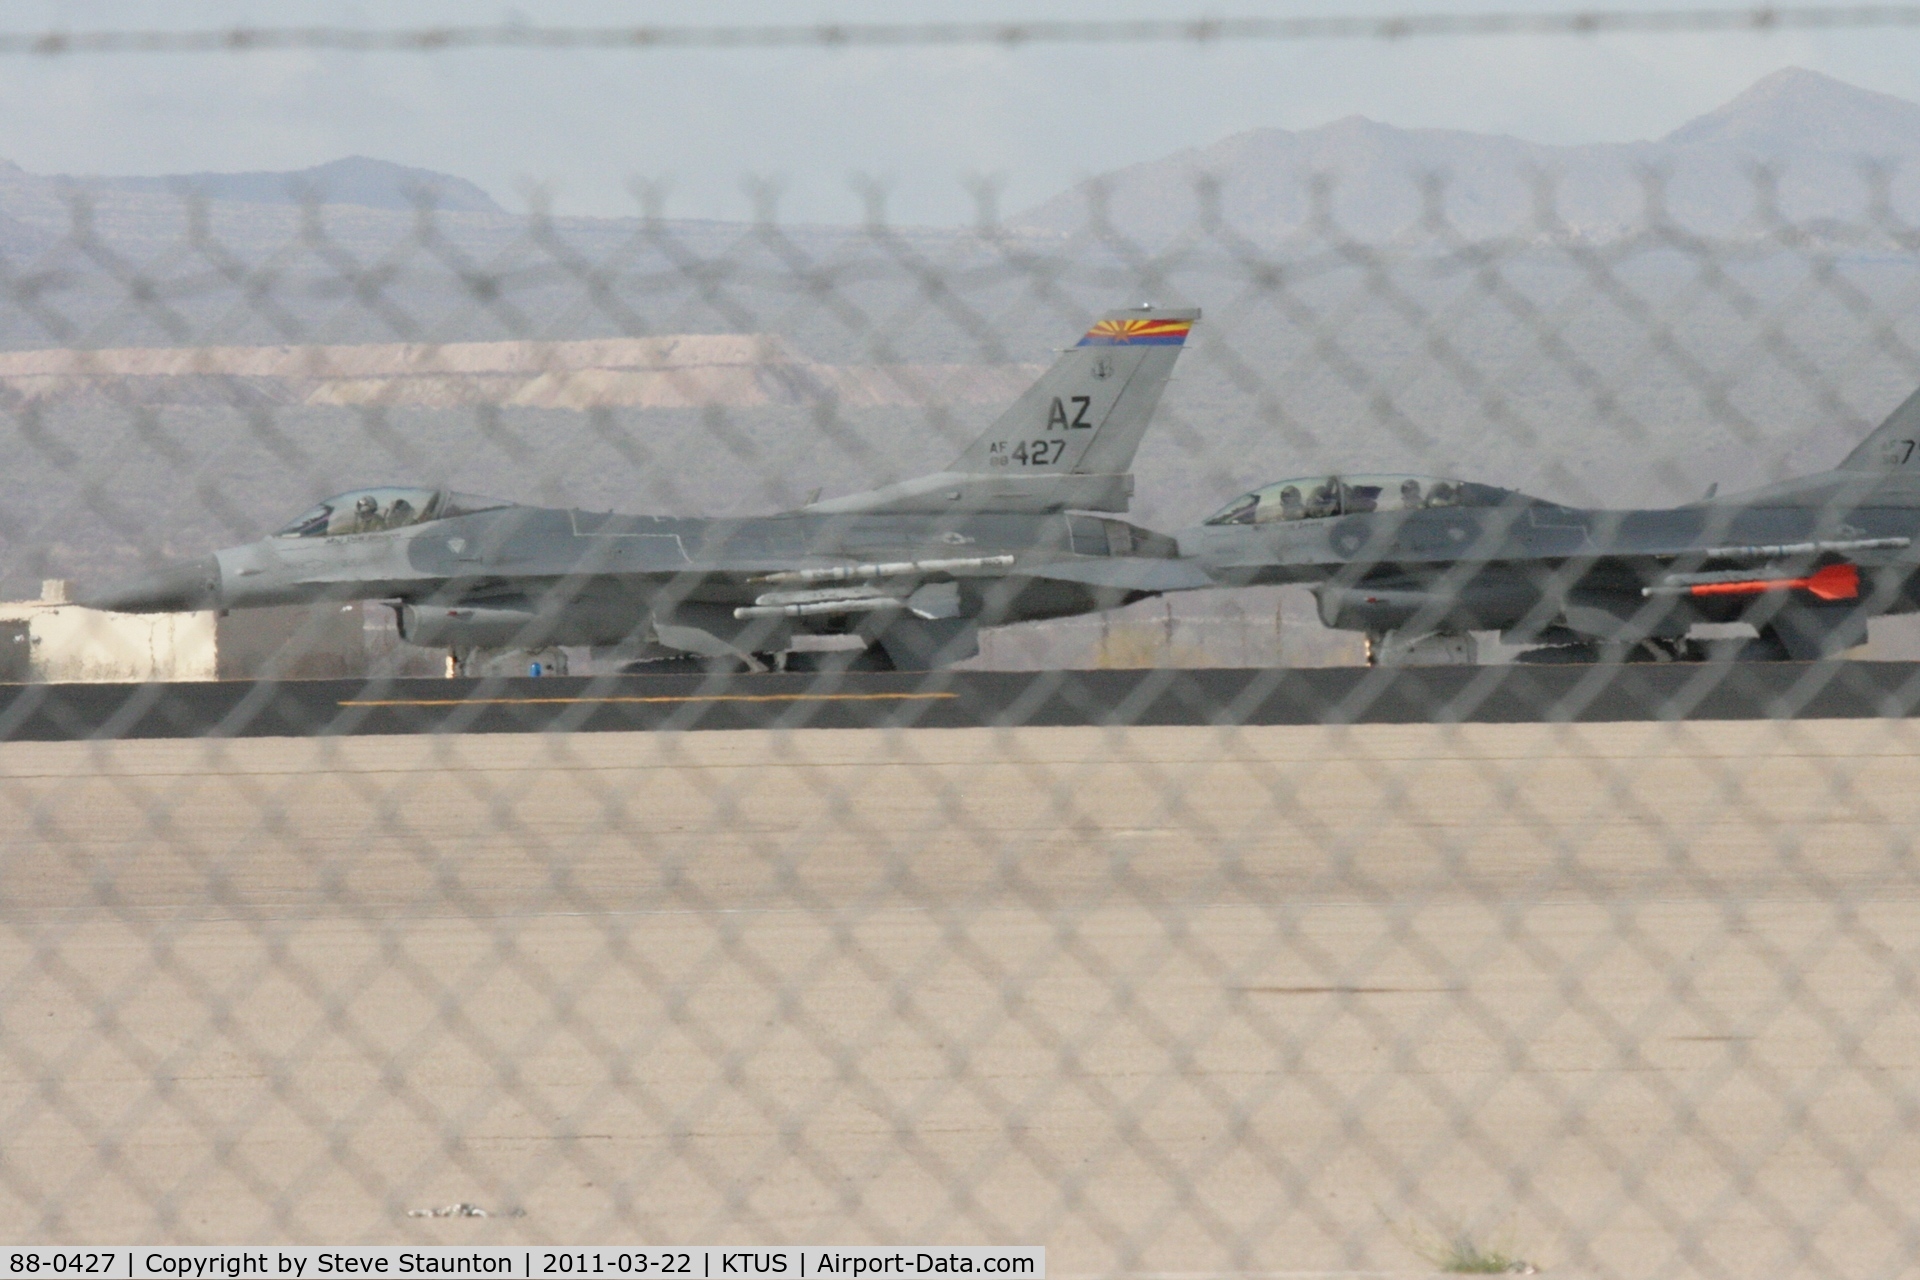 88-0427, 1988 General Dynamics F-16CM Fighting Falcon C/N 1C-029, Taken at Tucson International Airport, in March 2011 whilst on an Aeroprint Aviation tour